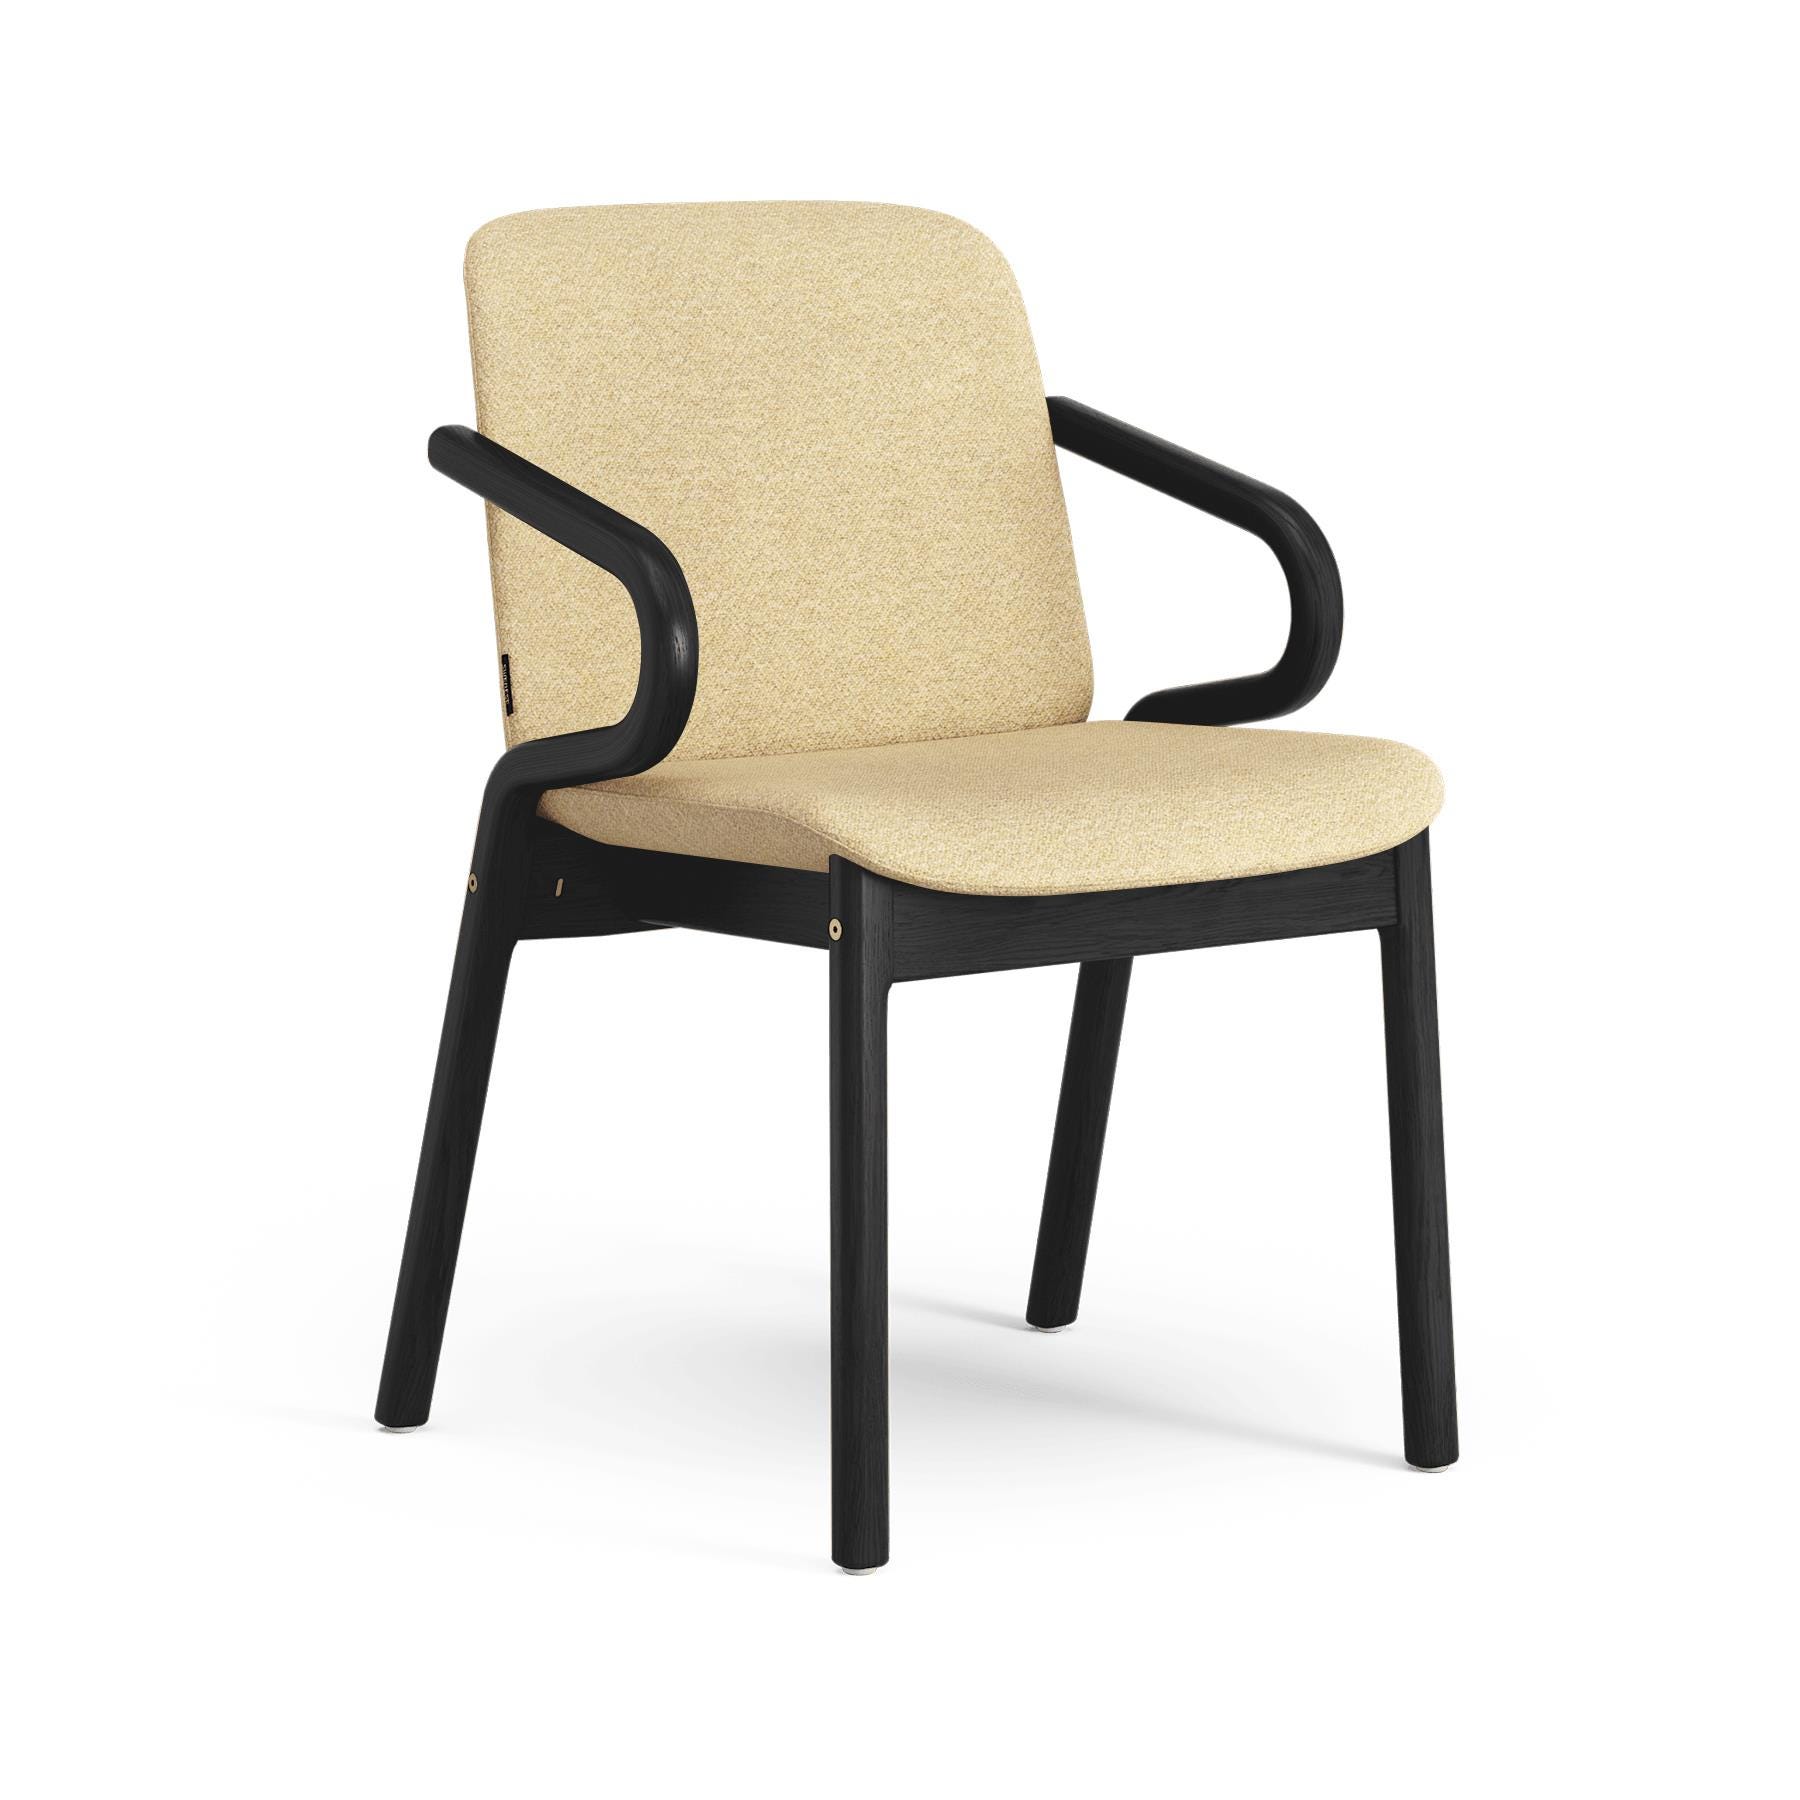 Swedese Amstelle Armchair Black Ash Ecriture 0410 Cream Designer Furniture From Holloways Of Ludlow